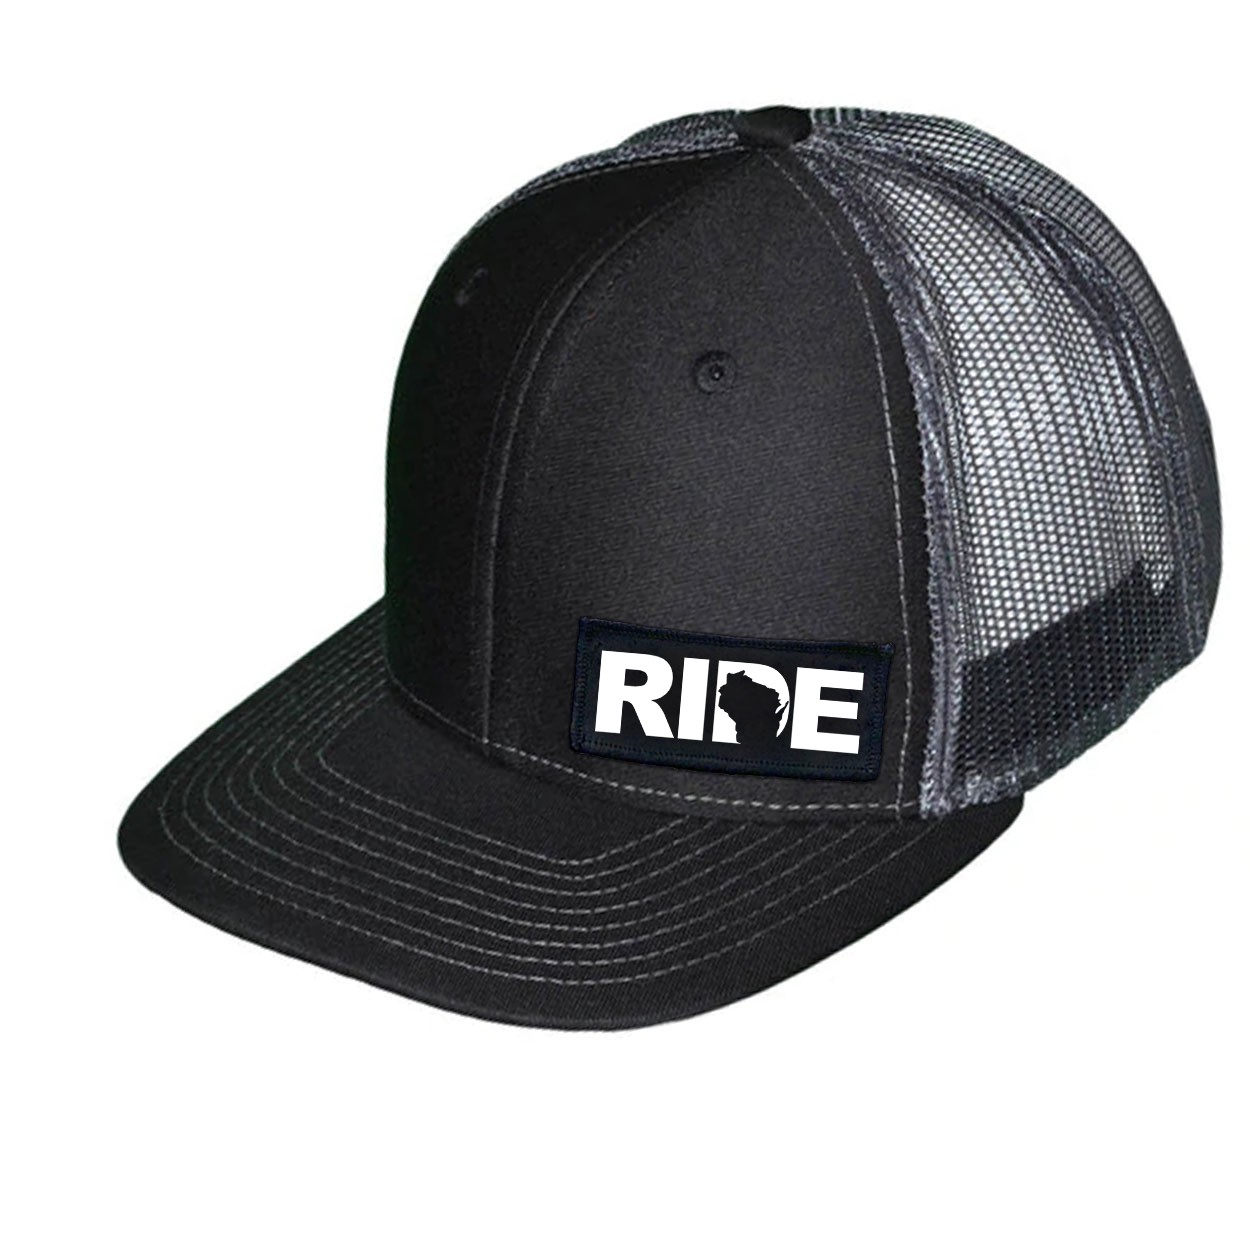 Ride Wisconsin Night Out Woven Patch Snapback Trucker Hat Black/Gray (White Logo)